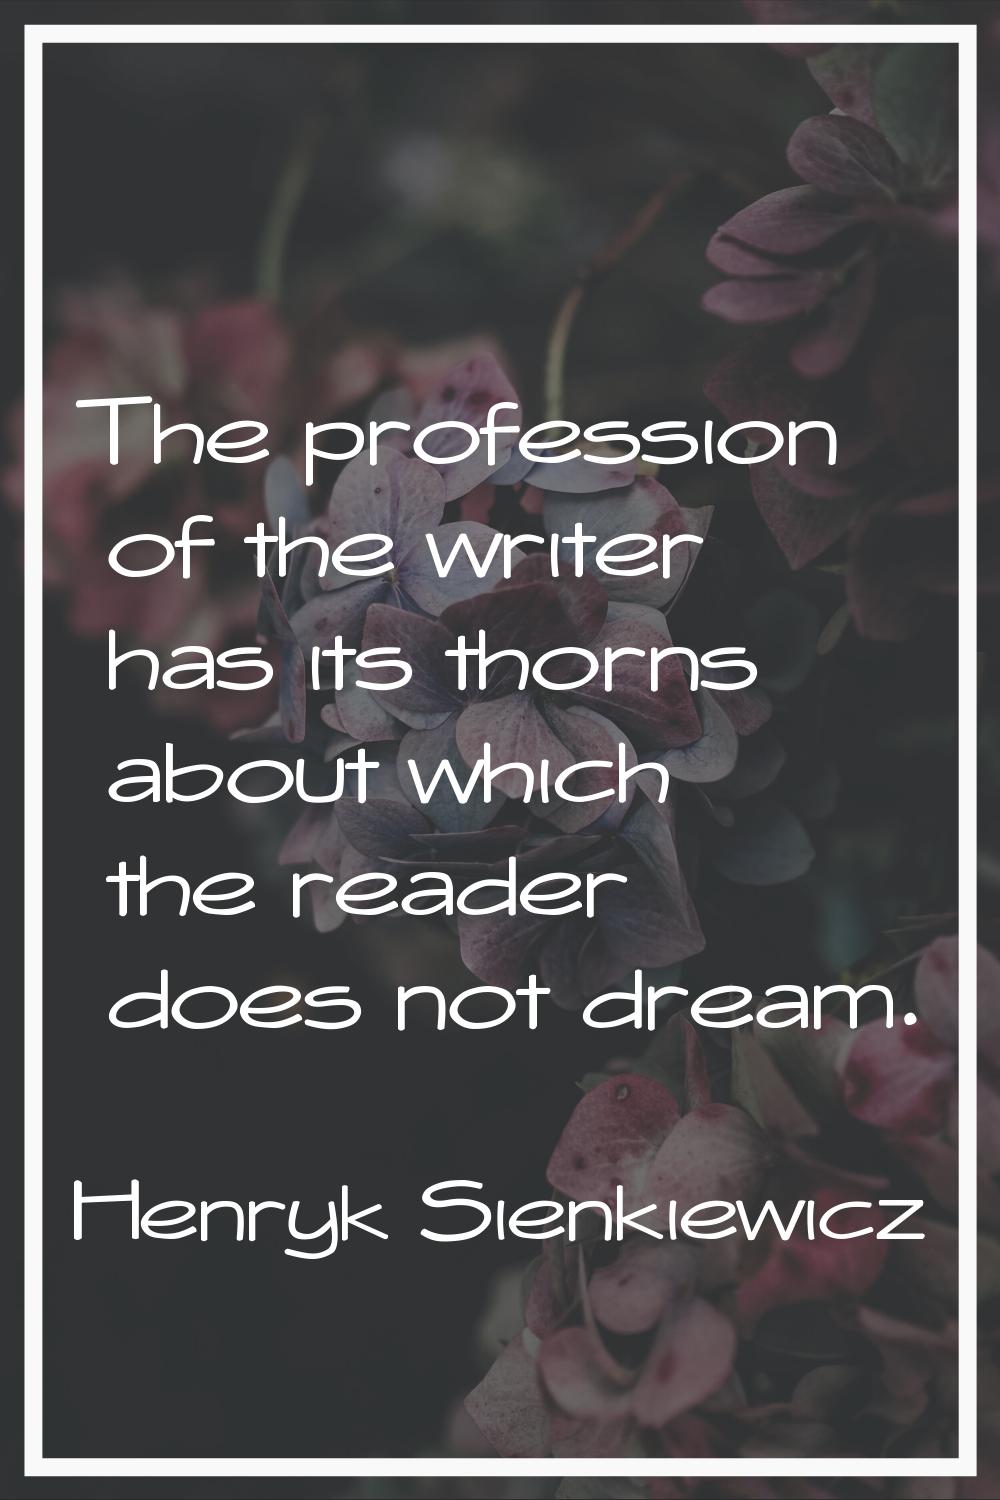 The profession of the writer has its thorns about which the reader does not dream.